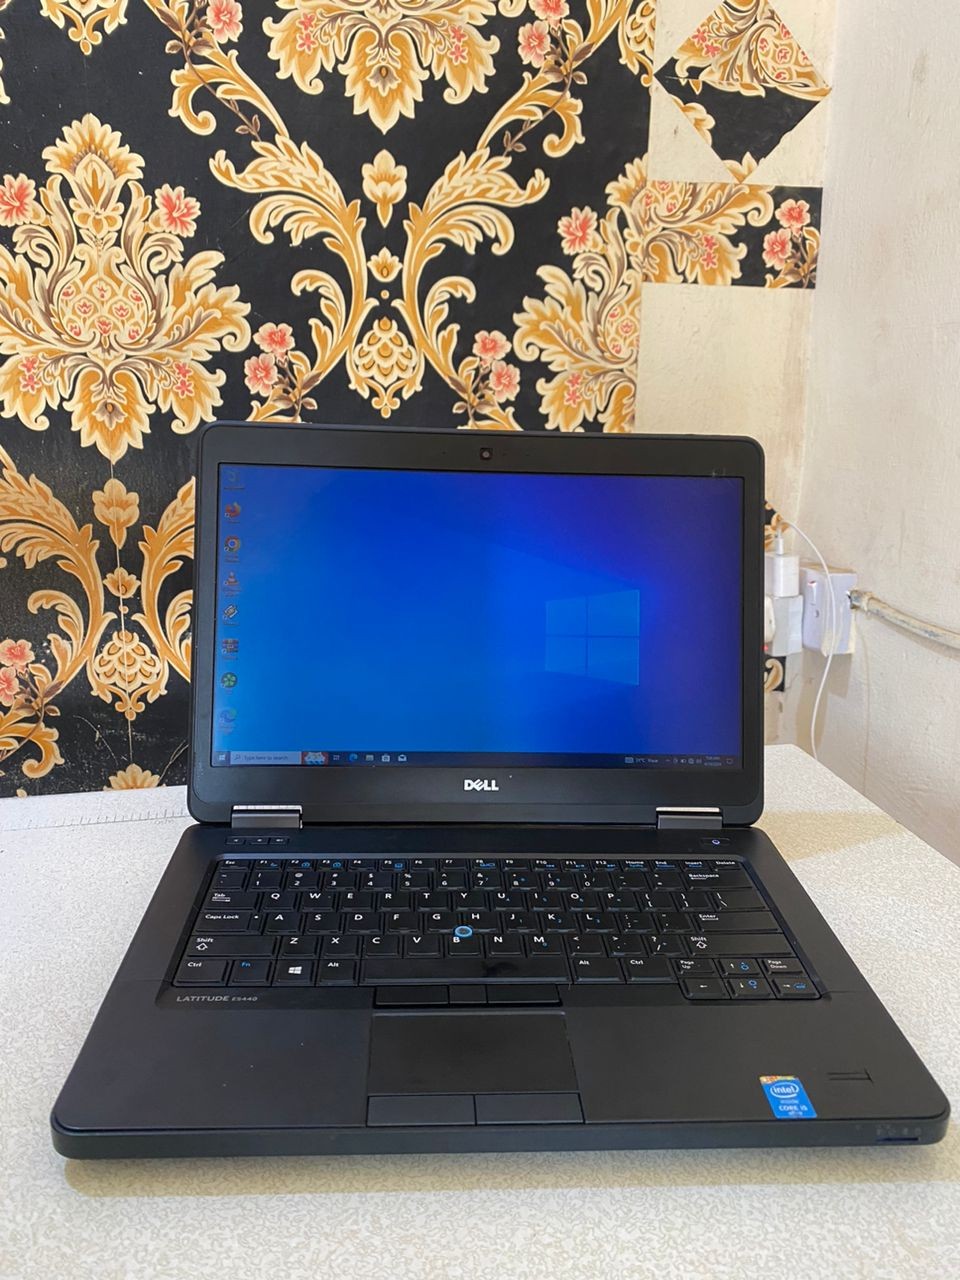 Very clean windows Dell laptop 10 pro corei5 Dell laptop  Latitude ES440  4GIG RAM  500GB HDD, Keyboard light, 3-4hours battery life